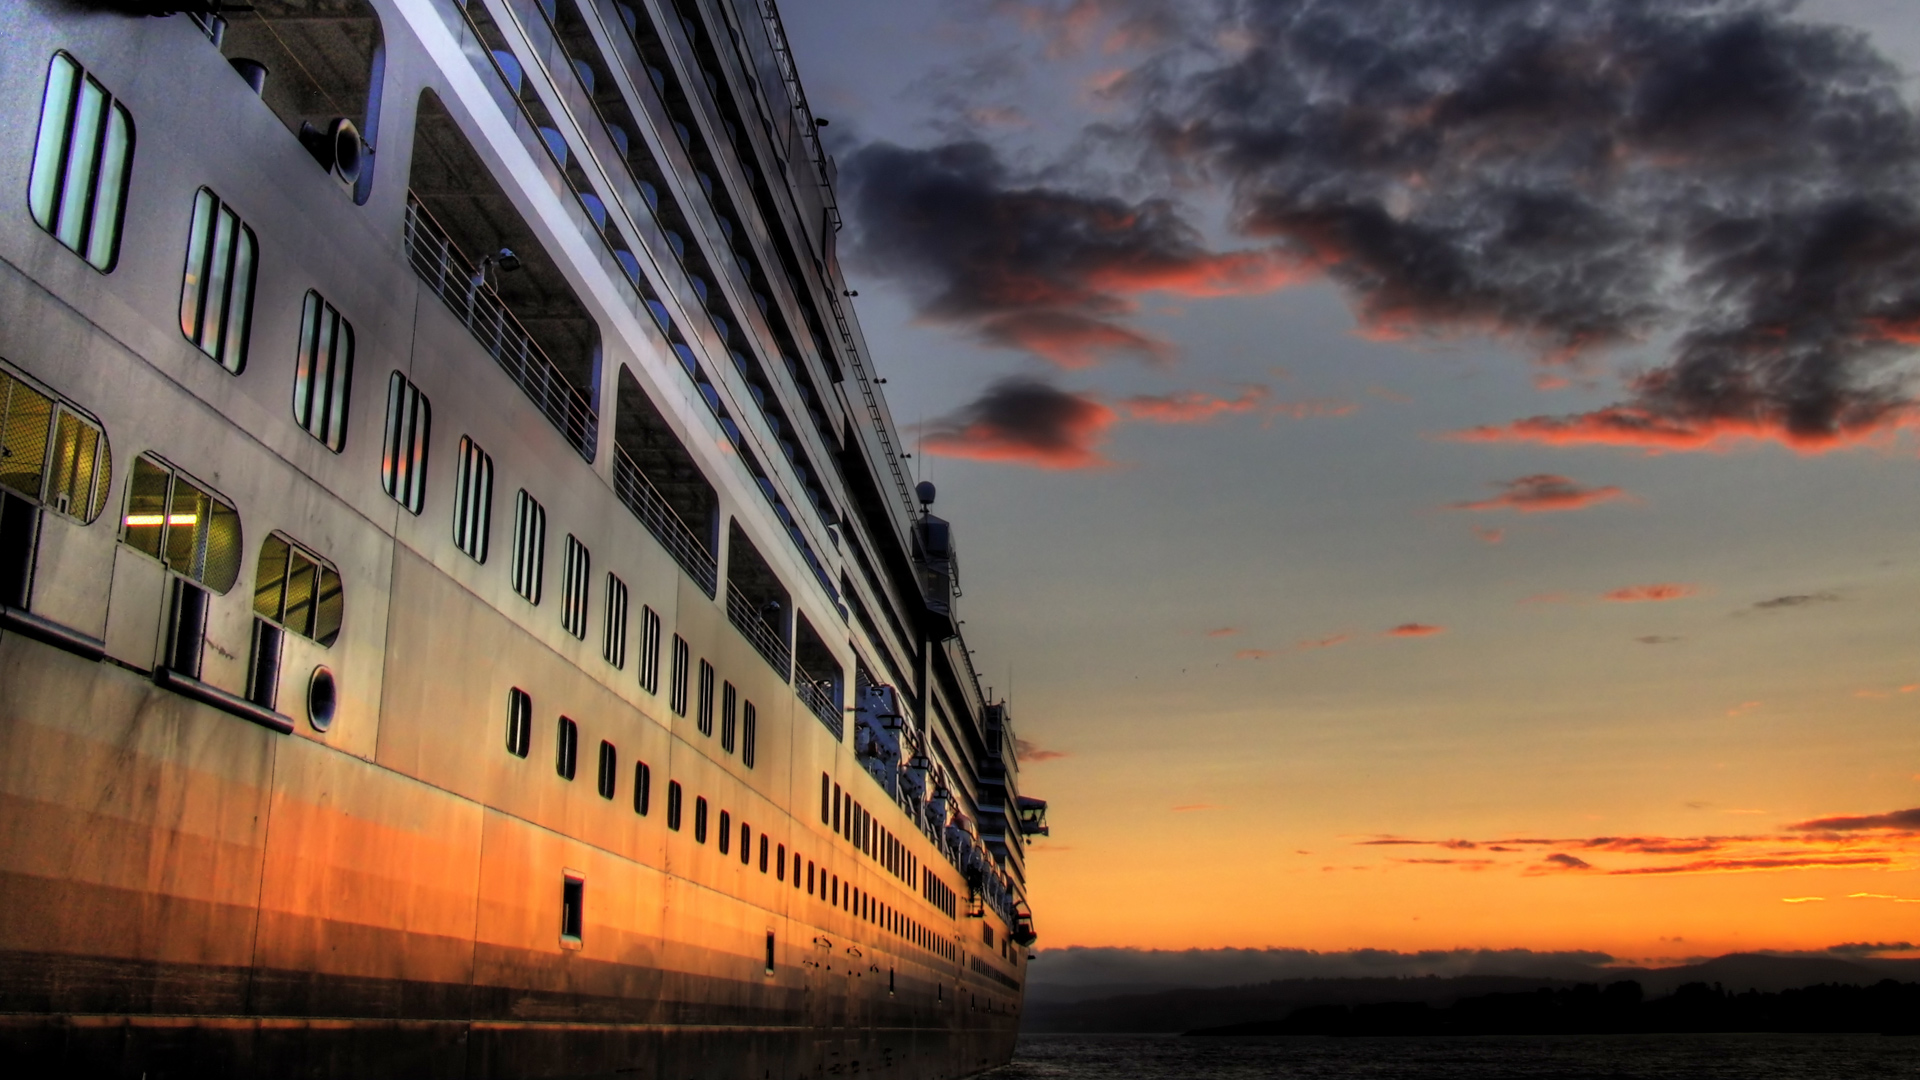 Cruise ship sailing towards a colorful sunset over a cloudy sky.